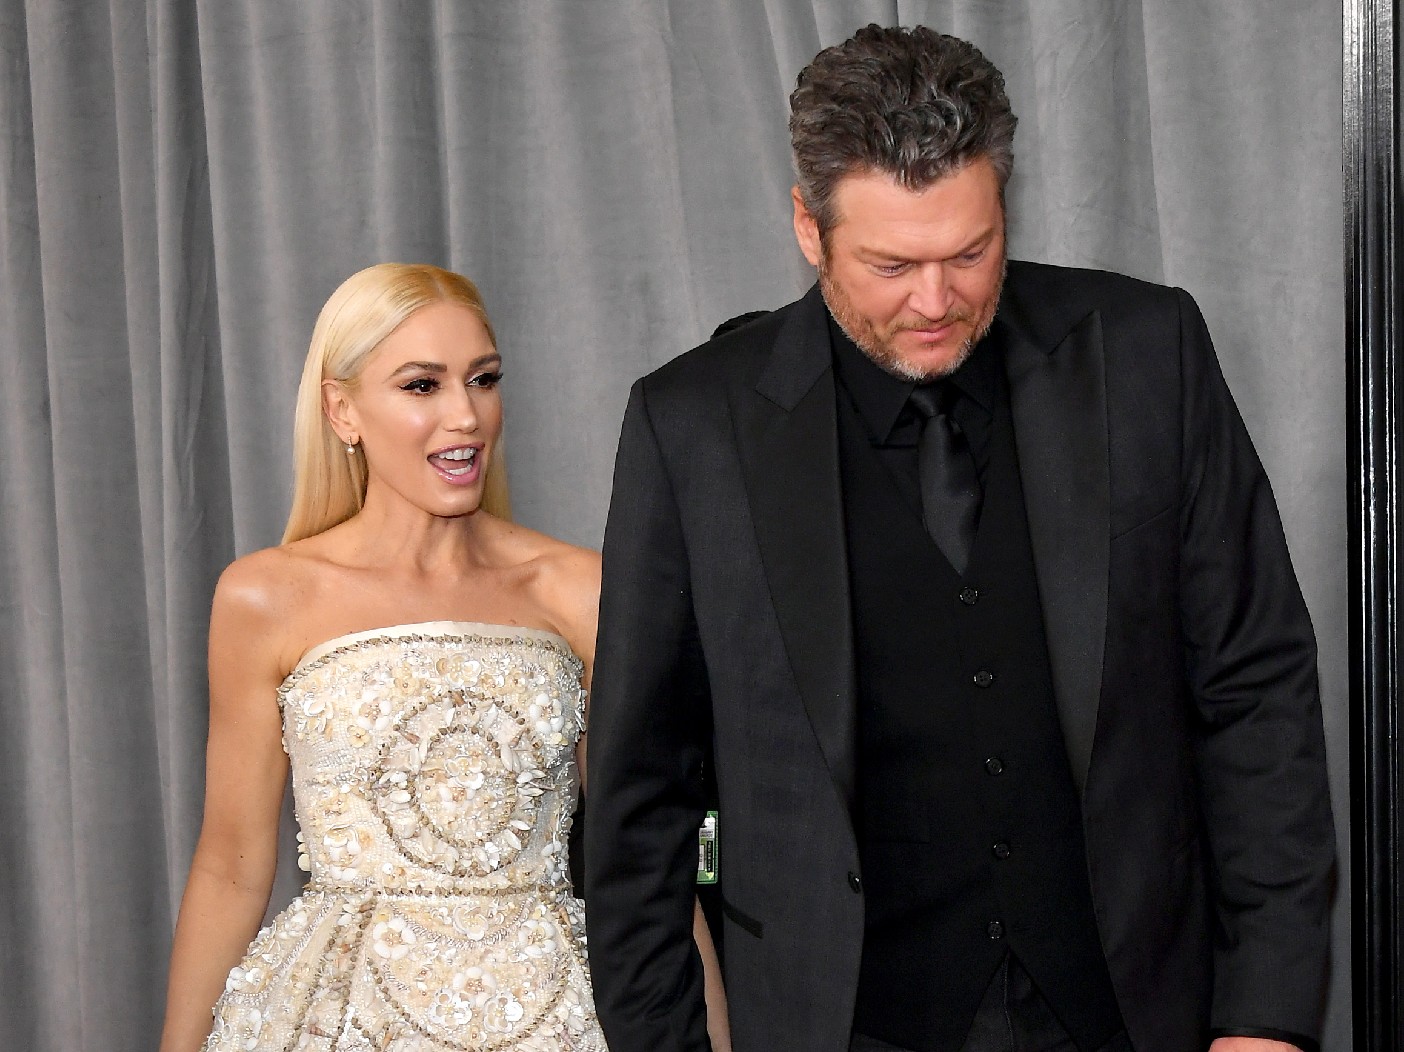 Blake Shelton and Gwen Stefani are allegedly planning for divorce, according to Gossip